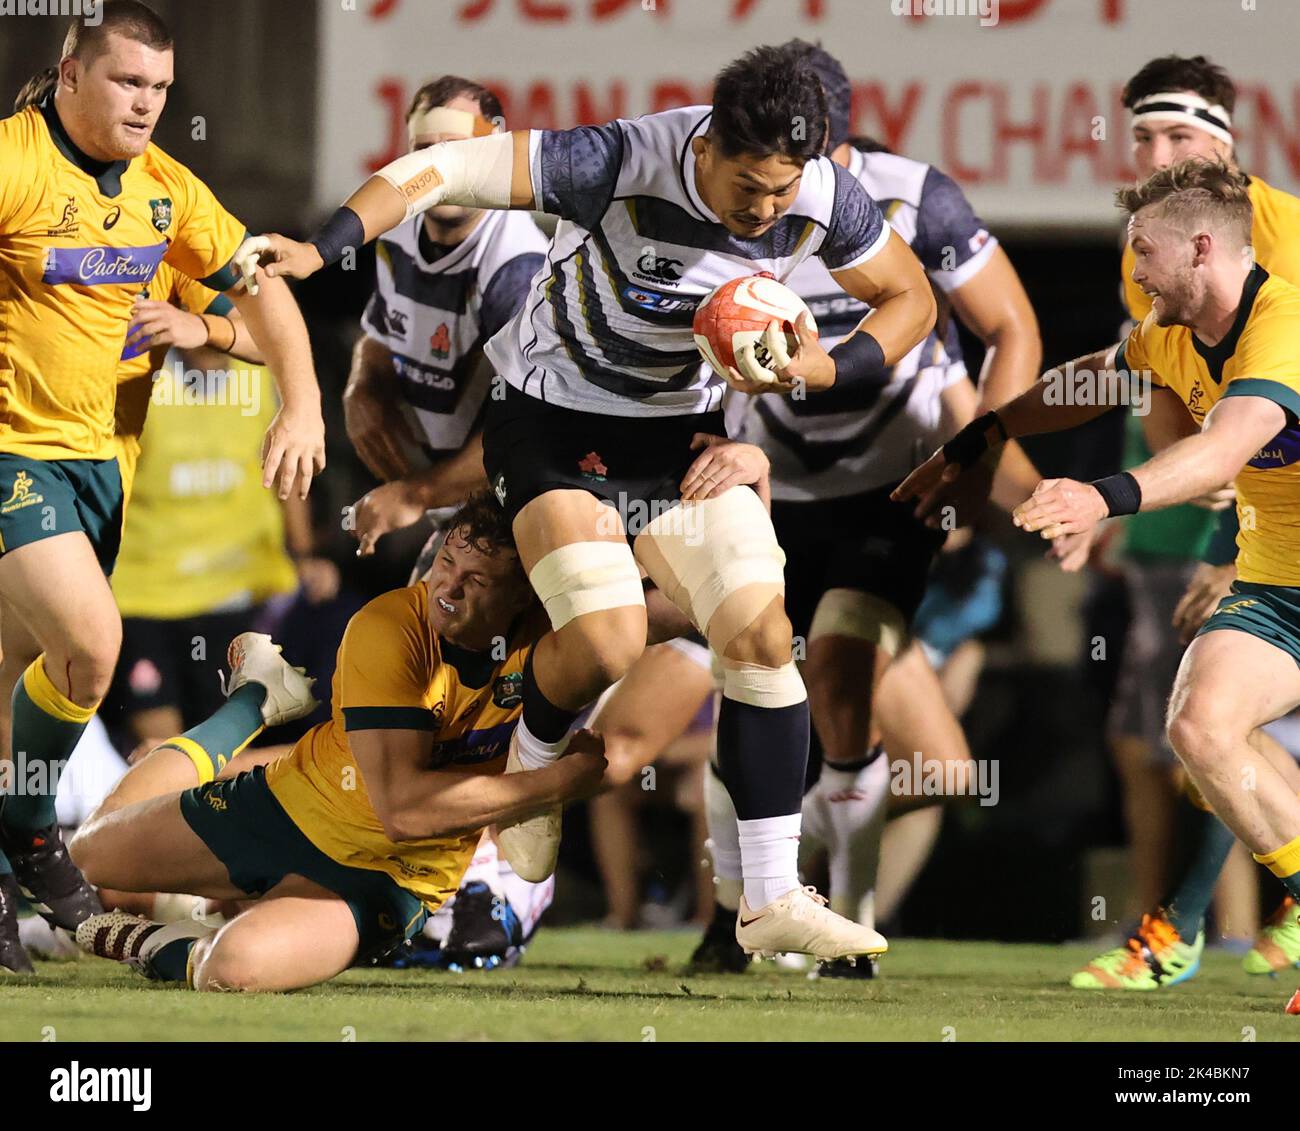 Tokyo, Japan. 1st Oct, 2022. Japan XV flanker Kazuki Himeno carries the ball at an international rugby match against Australia A of Japan Rugby Challenge Series at the Prince Chichibu stadium in Tokyo on Saturday, October 1, 2022. Japan was defeated by Australia A 22-34. Credit: Yoshio Tsunoda/AFLO/Alamy Live News Stock Photo